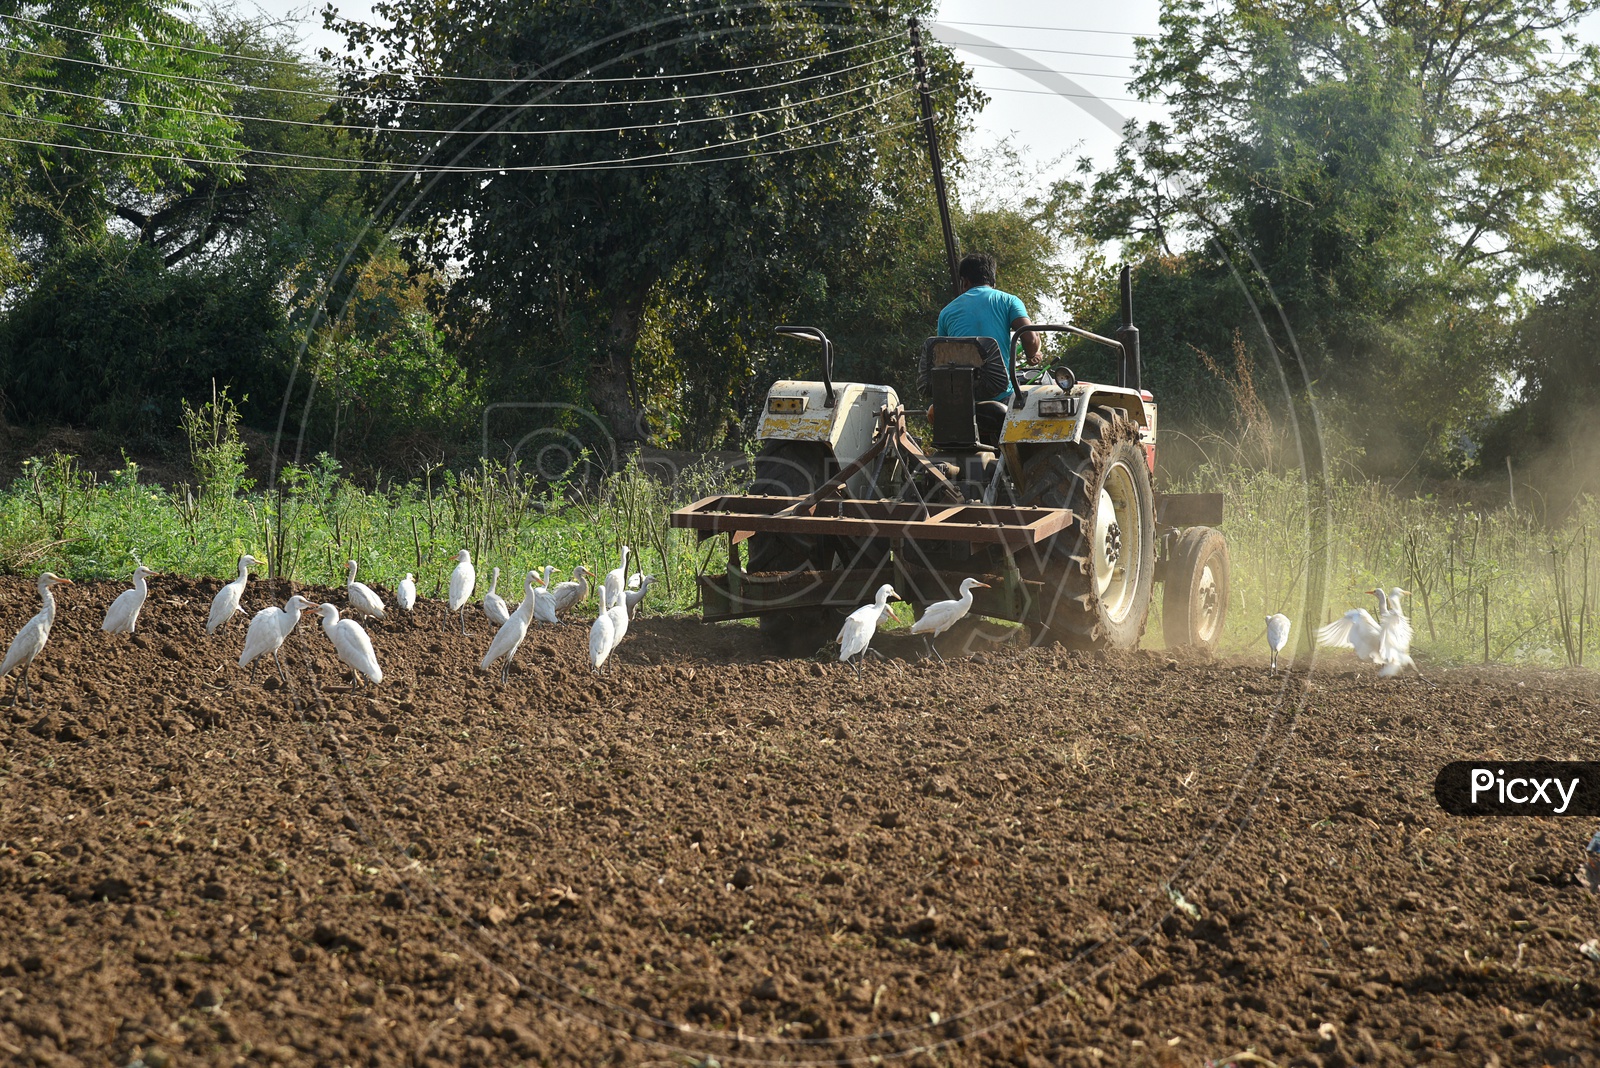 An Indian Farmer Ploughing The Agricultural Field With Tractor Preparing The Land For Sowing With Seedbed Cultivator